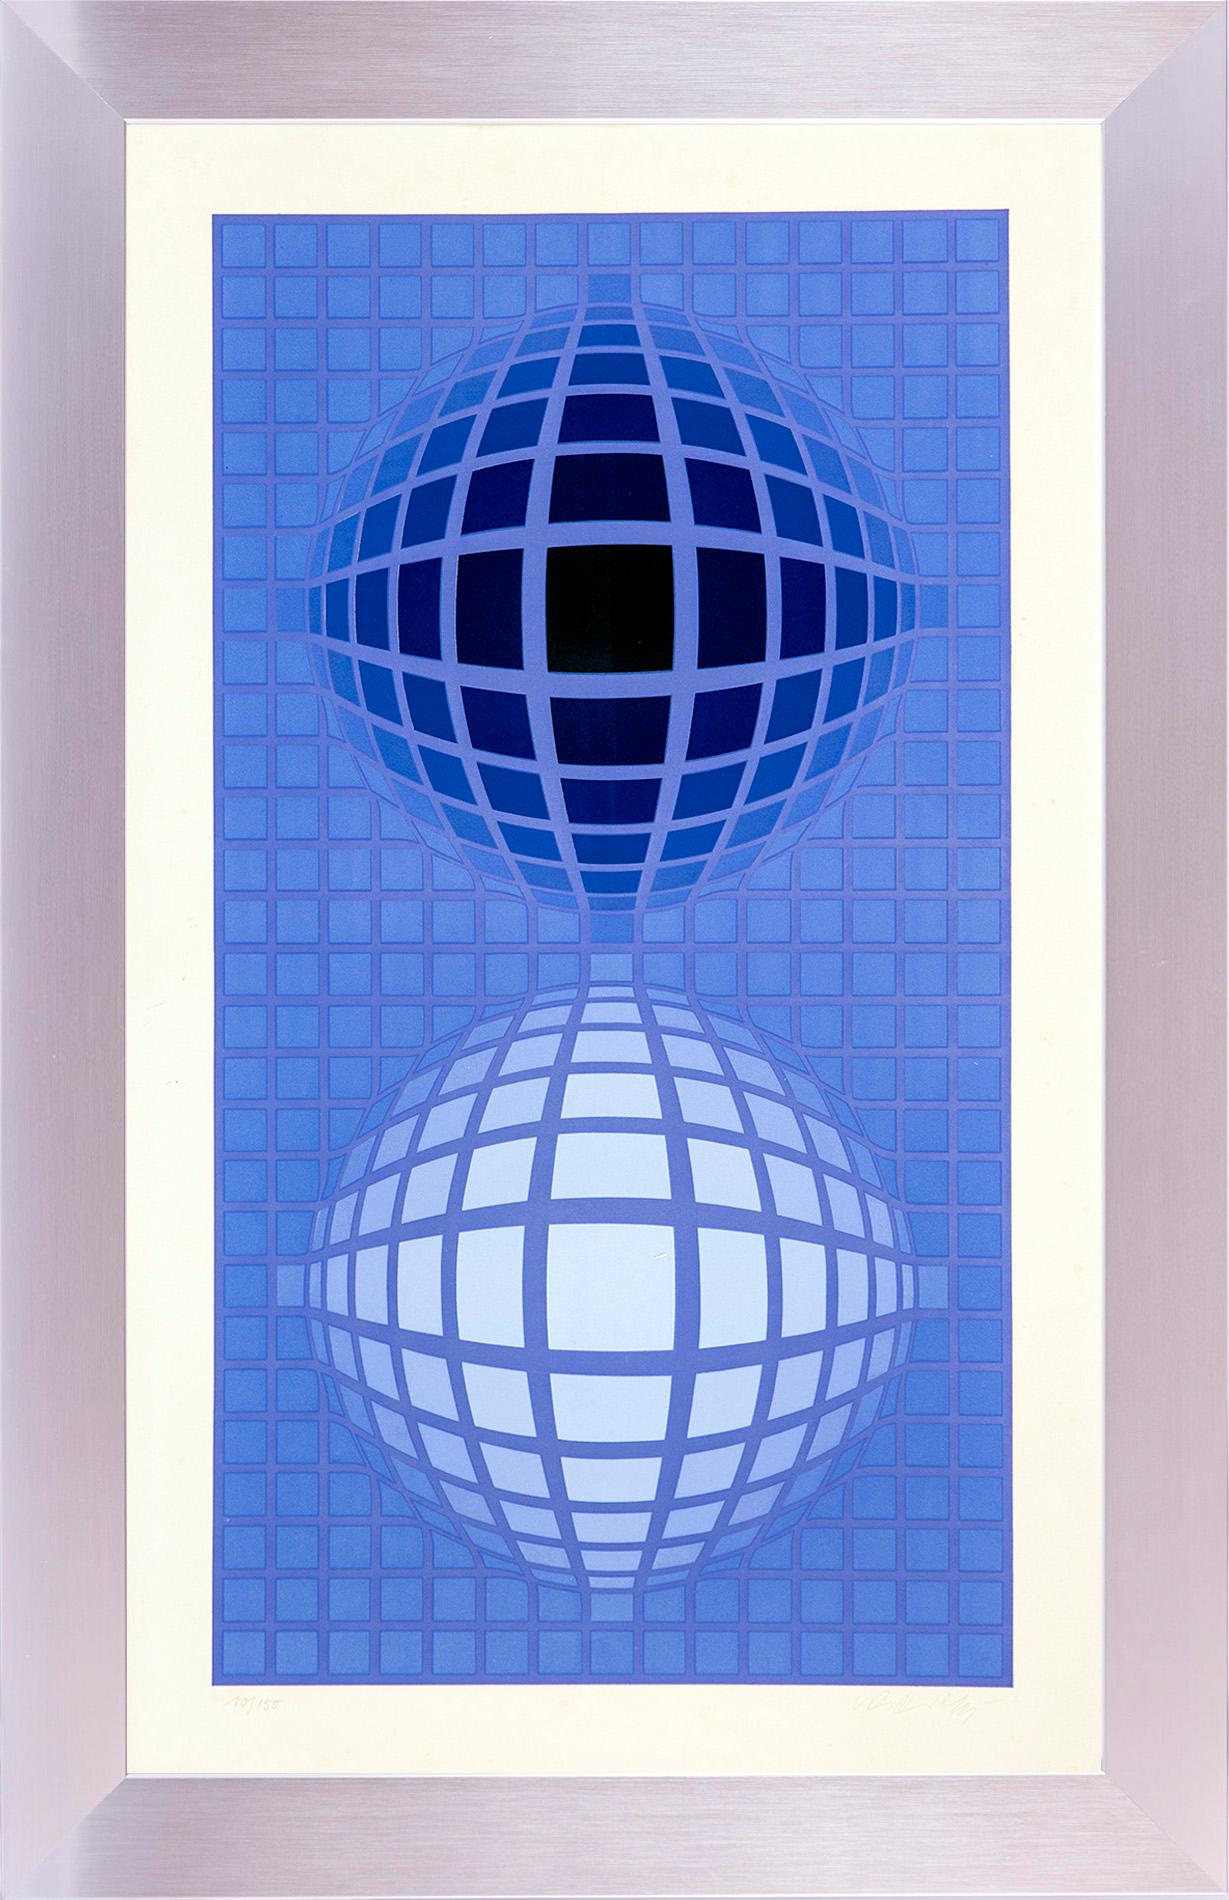 Victor Vasarely - Oltar, 1971 Serigraph signed and numbered in pencil Edition 10/150 
Size: 34.5 in. x 24.5 in. (87.63 cm x 62.23 cm) 
Great condition 
Certificate of Authenticity included 
 As an optical illusion that captures the viewer’s